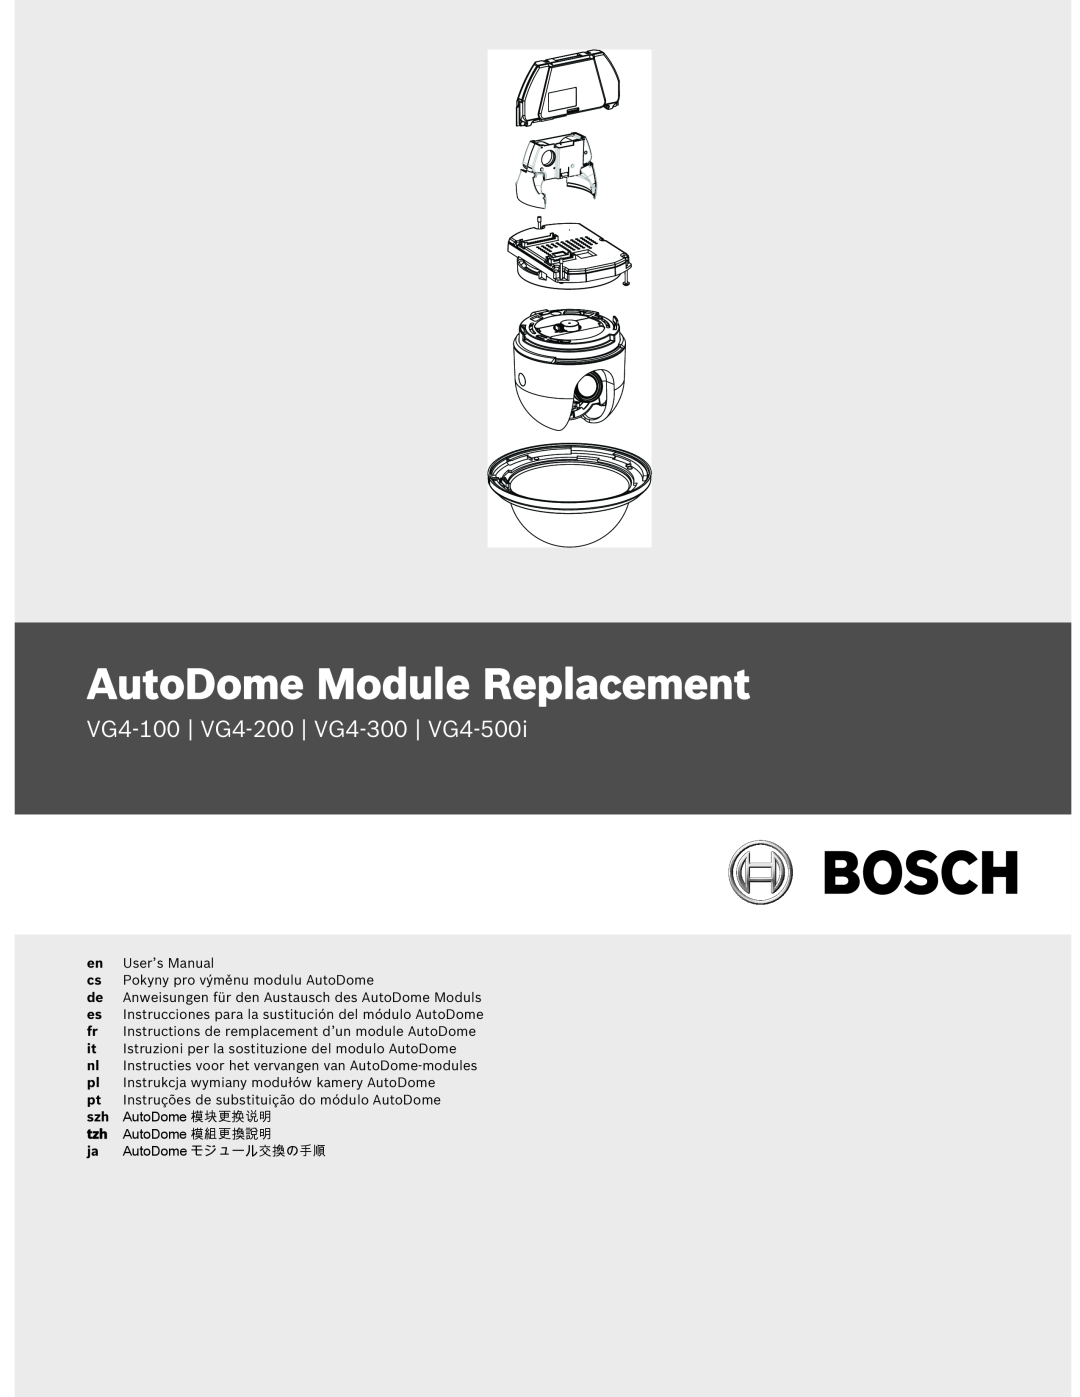 Bosch Appliances user manual AutoDome Module Replacement, VG4-100 VG4-200 VG4-300 VG4-500i 